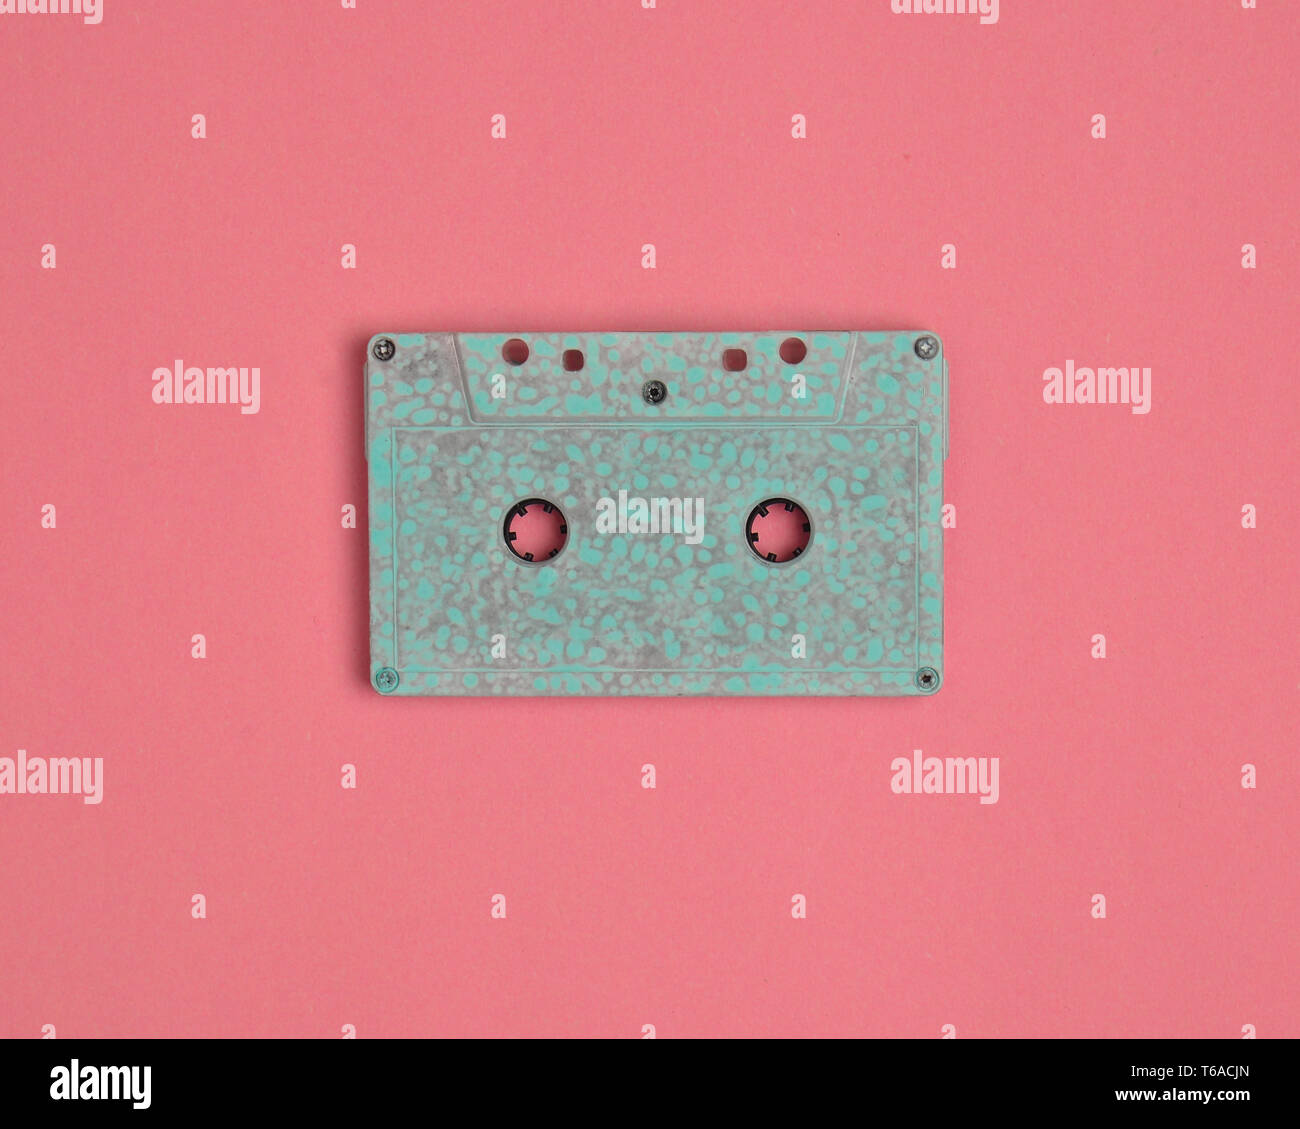 Minimalistic trend of audio technology from the 80s. Audio cassette on pastel color background. Stock Photo